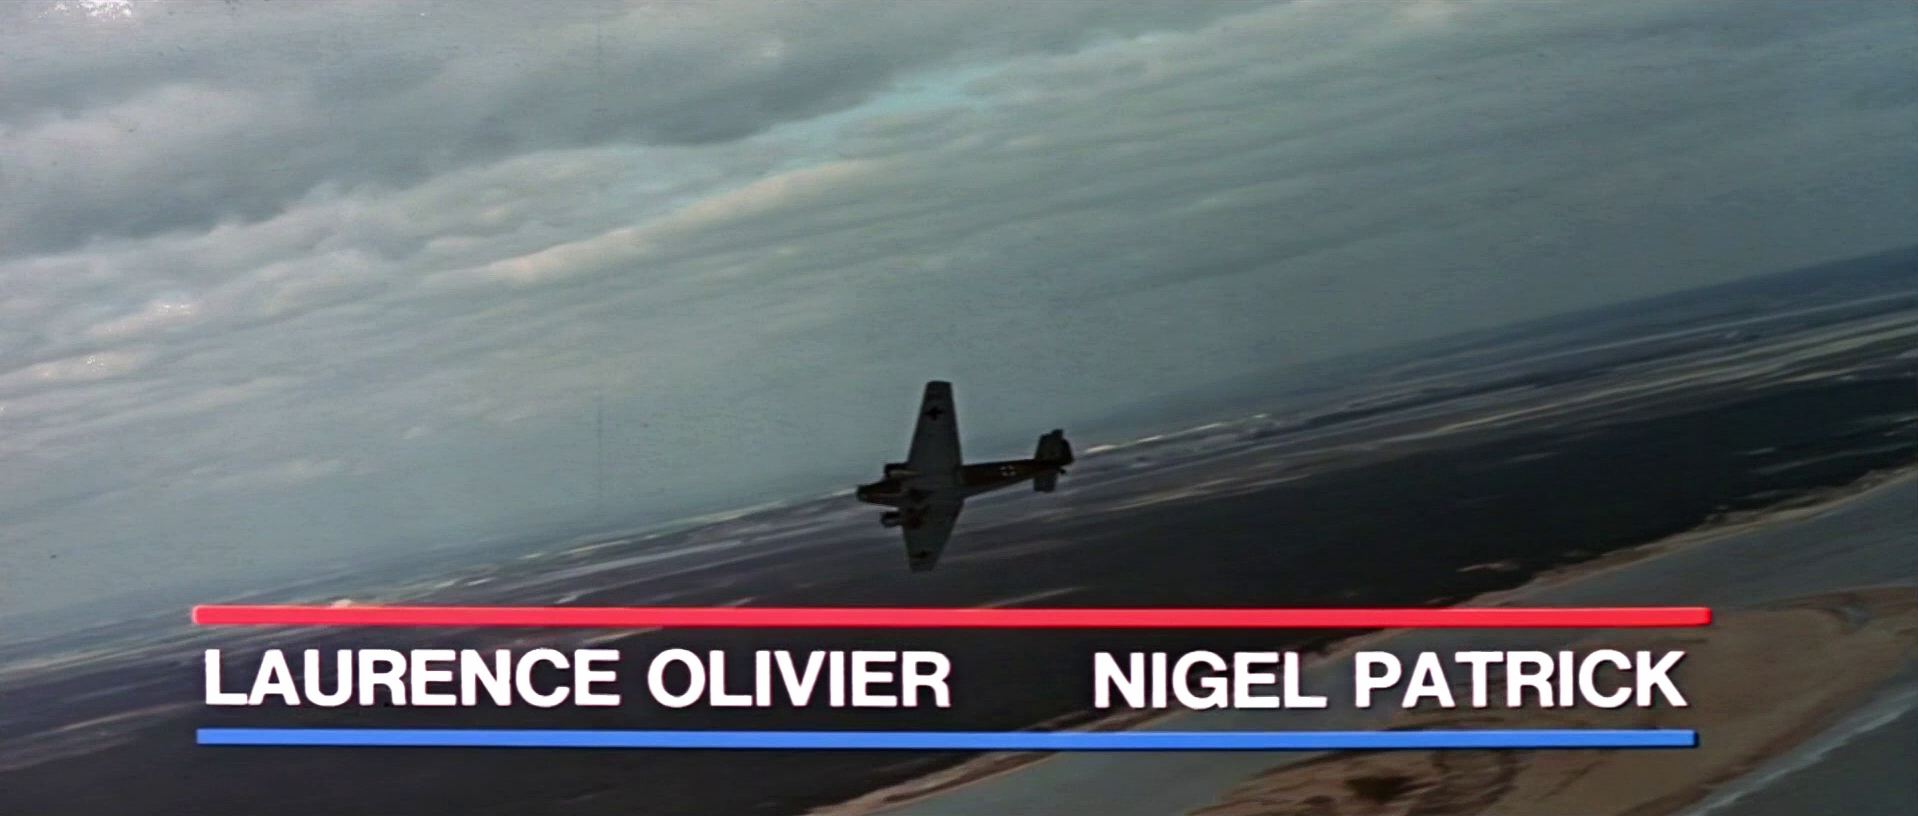 Main title from Battle of Britain (1969) (6). Laurence Olivier, Nigel Patrick